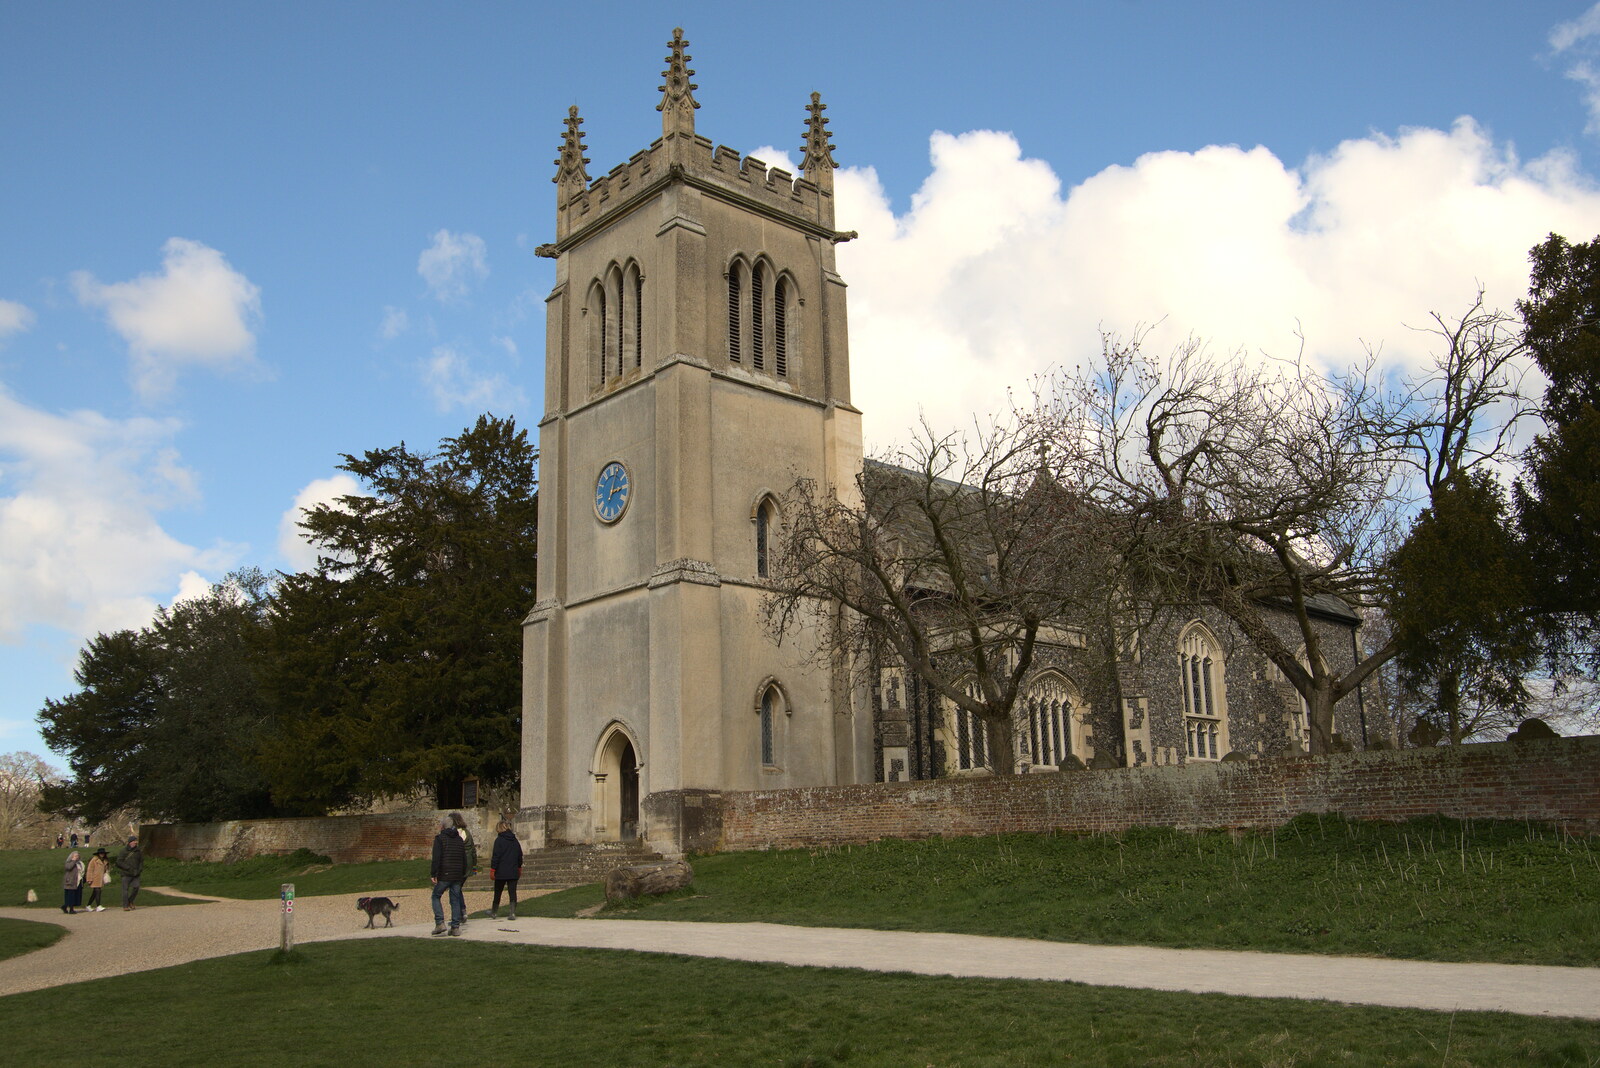 St. Mary's Church, Ickworth from A Return to Ickworth House, Horringer, Suffolk - 11th April 2021